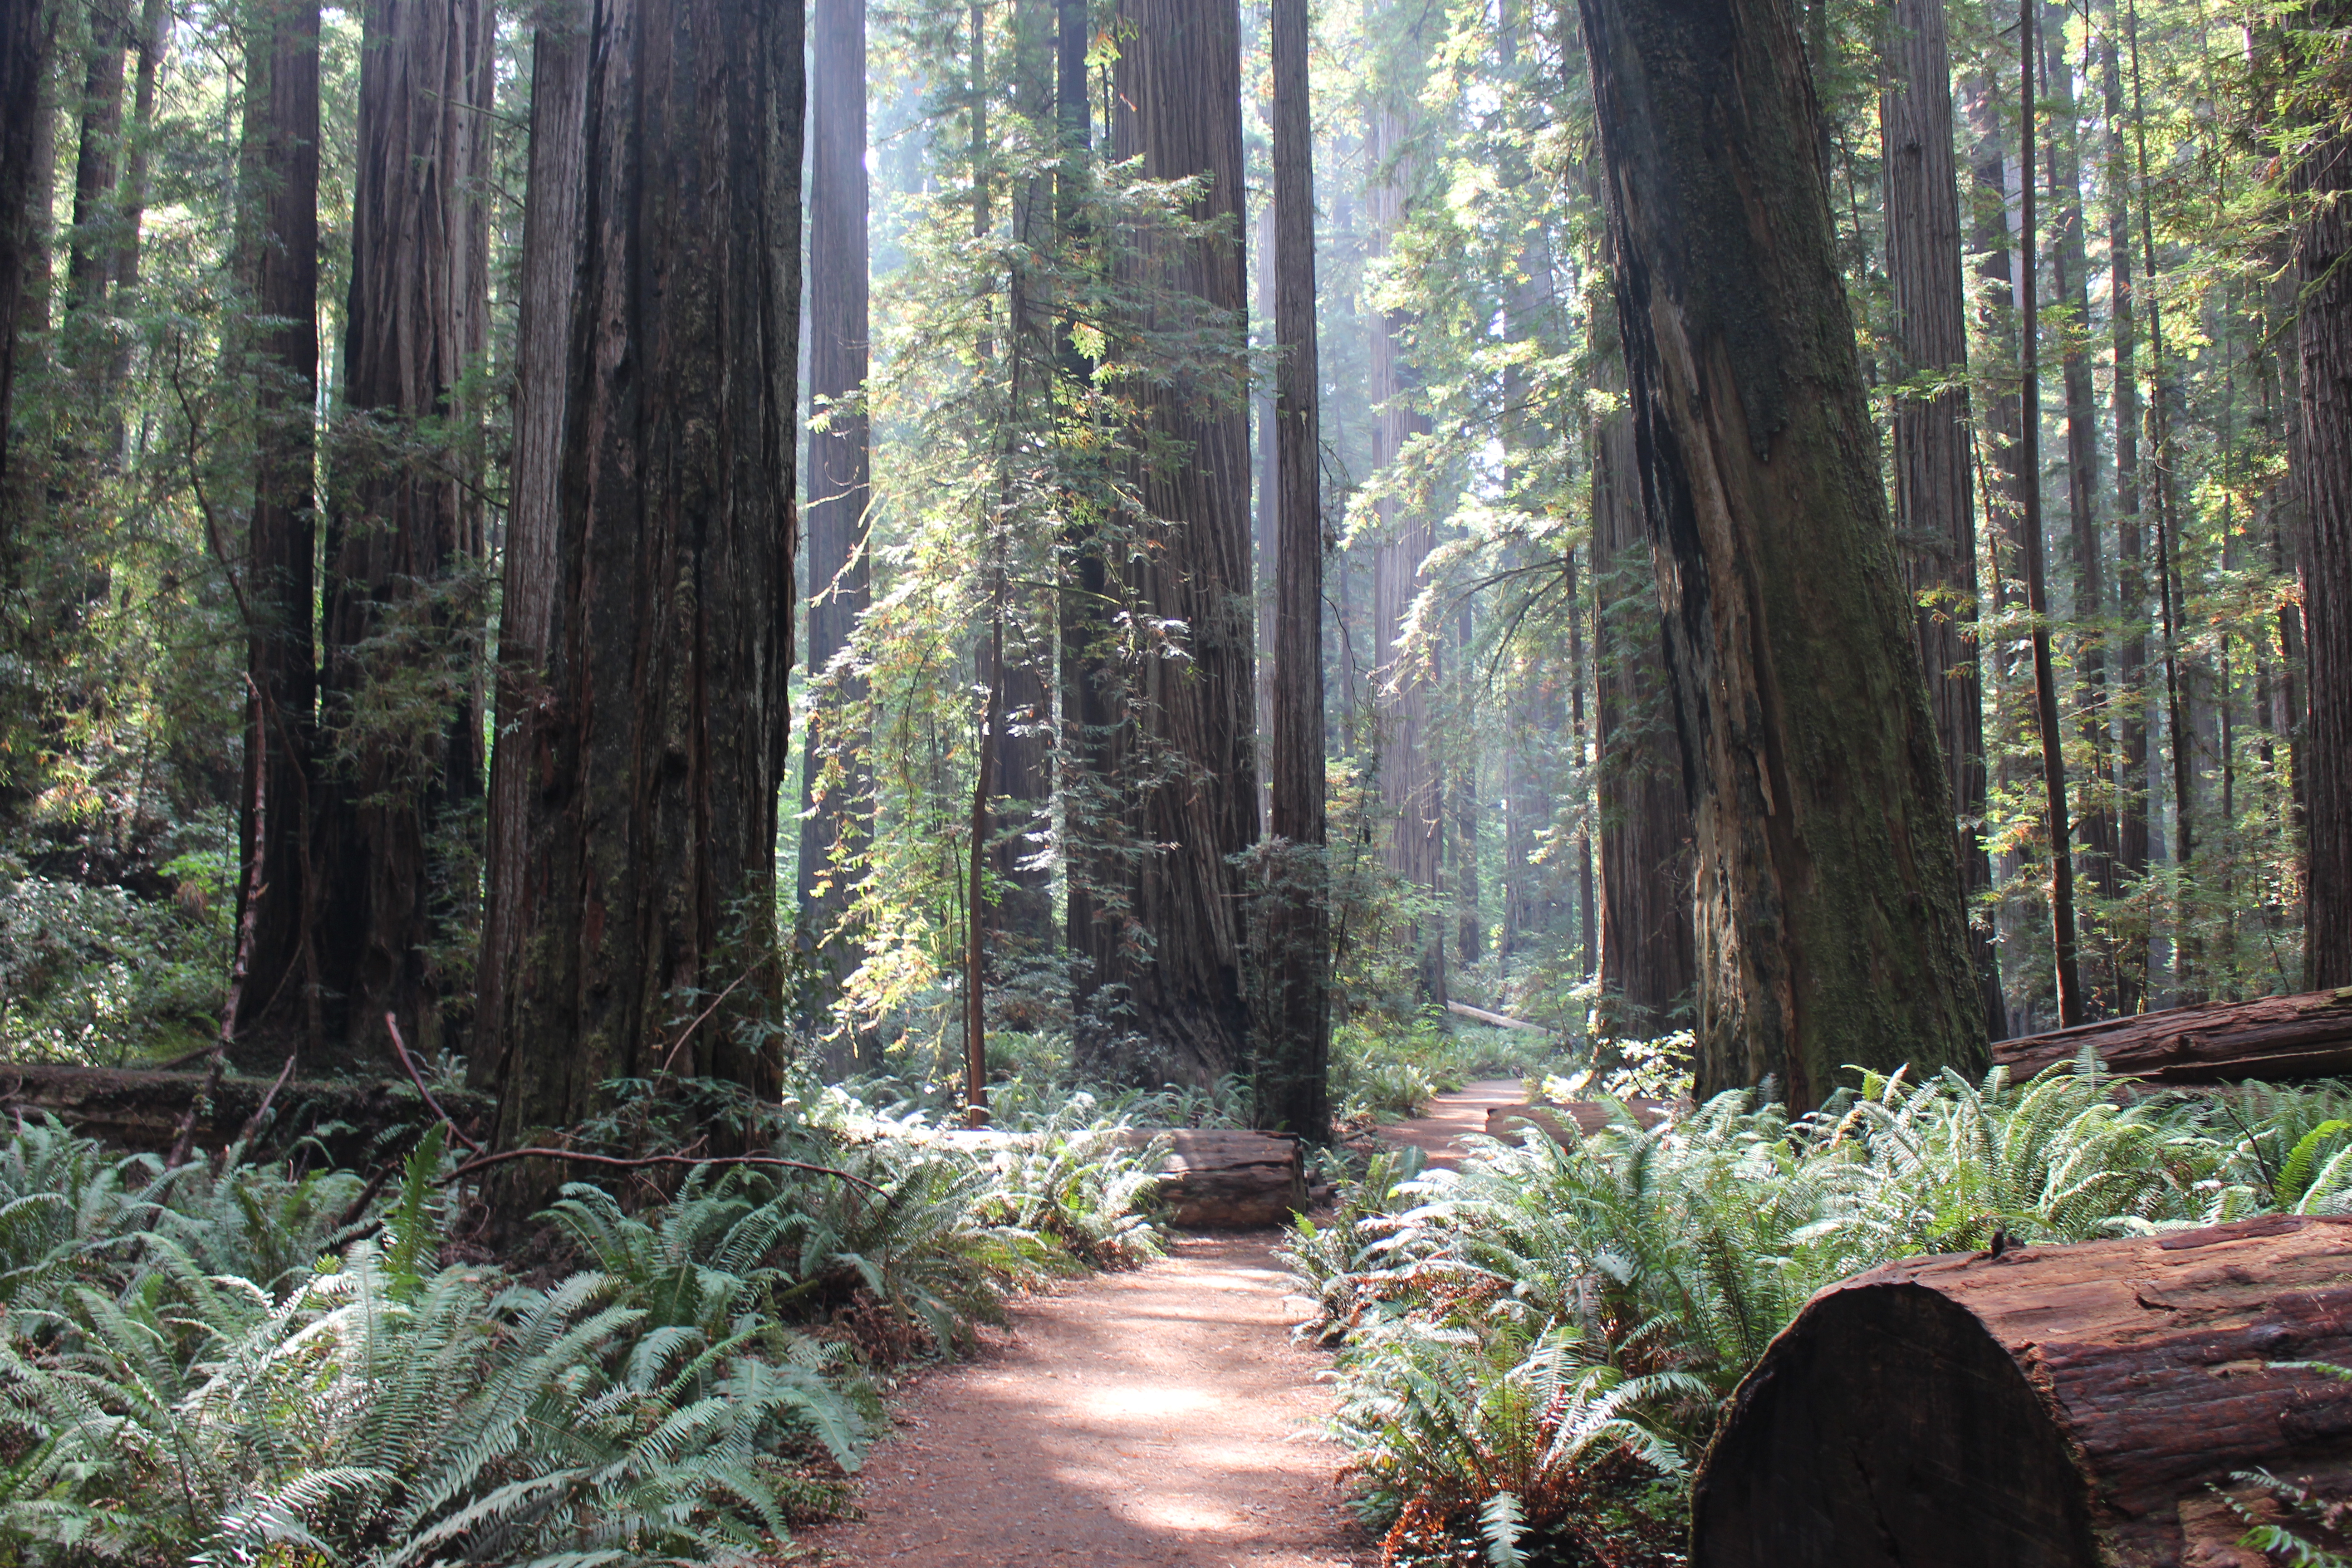 Trail through a redwood forest